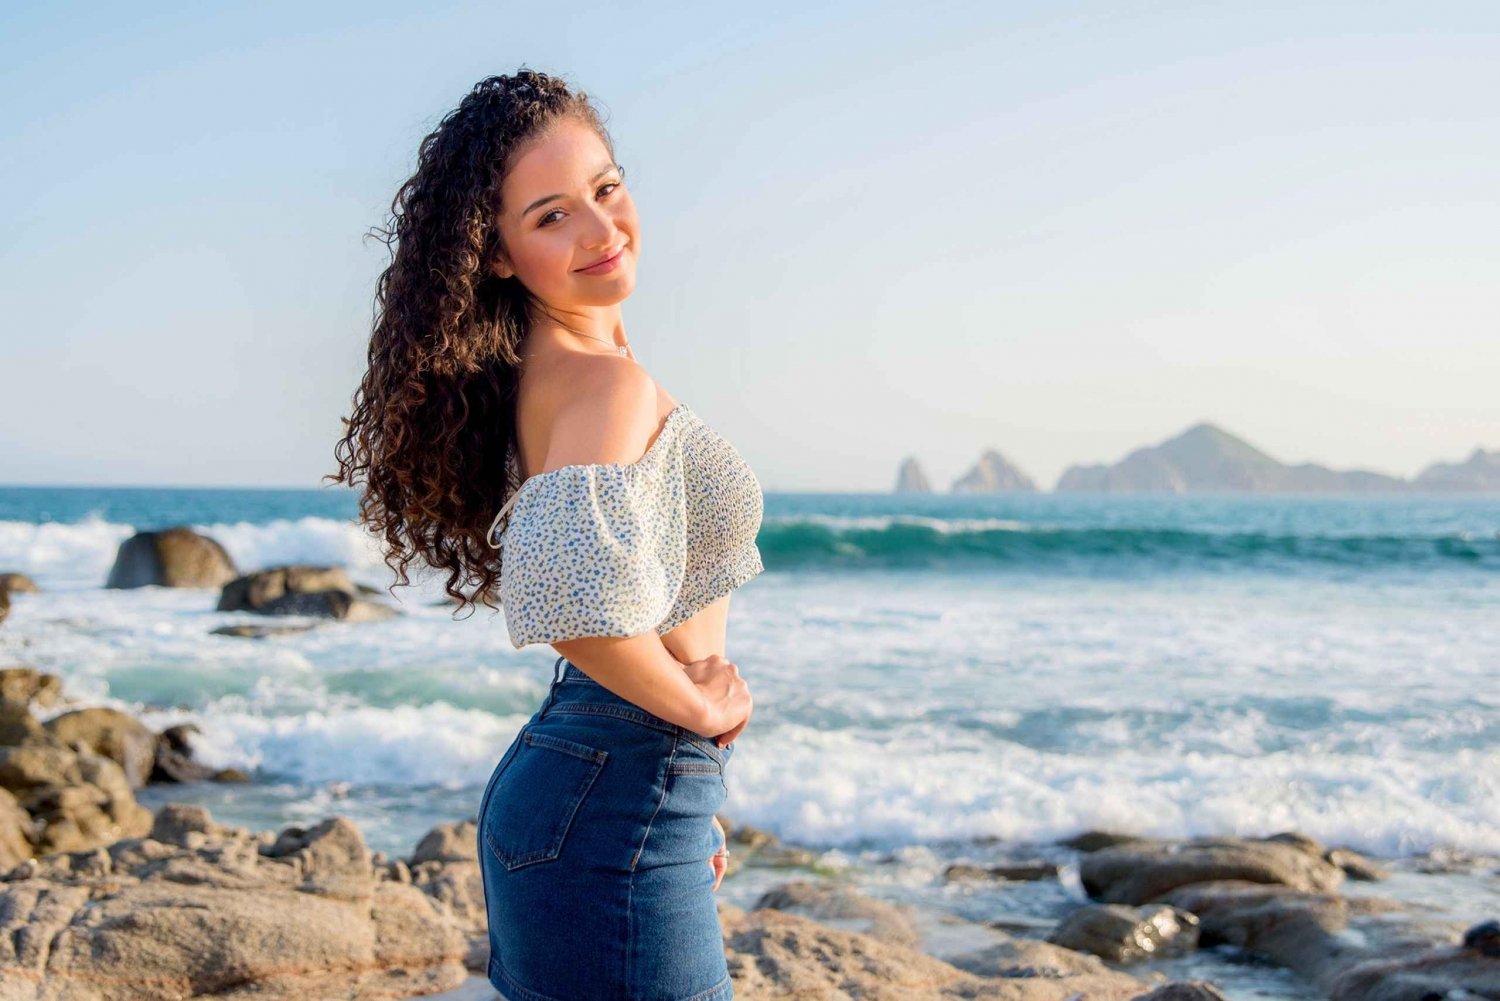 Los Cabos: Photo Session with Private Photographer